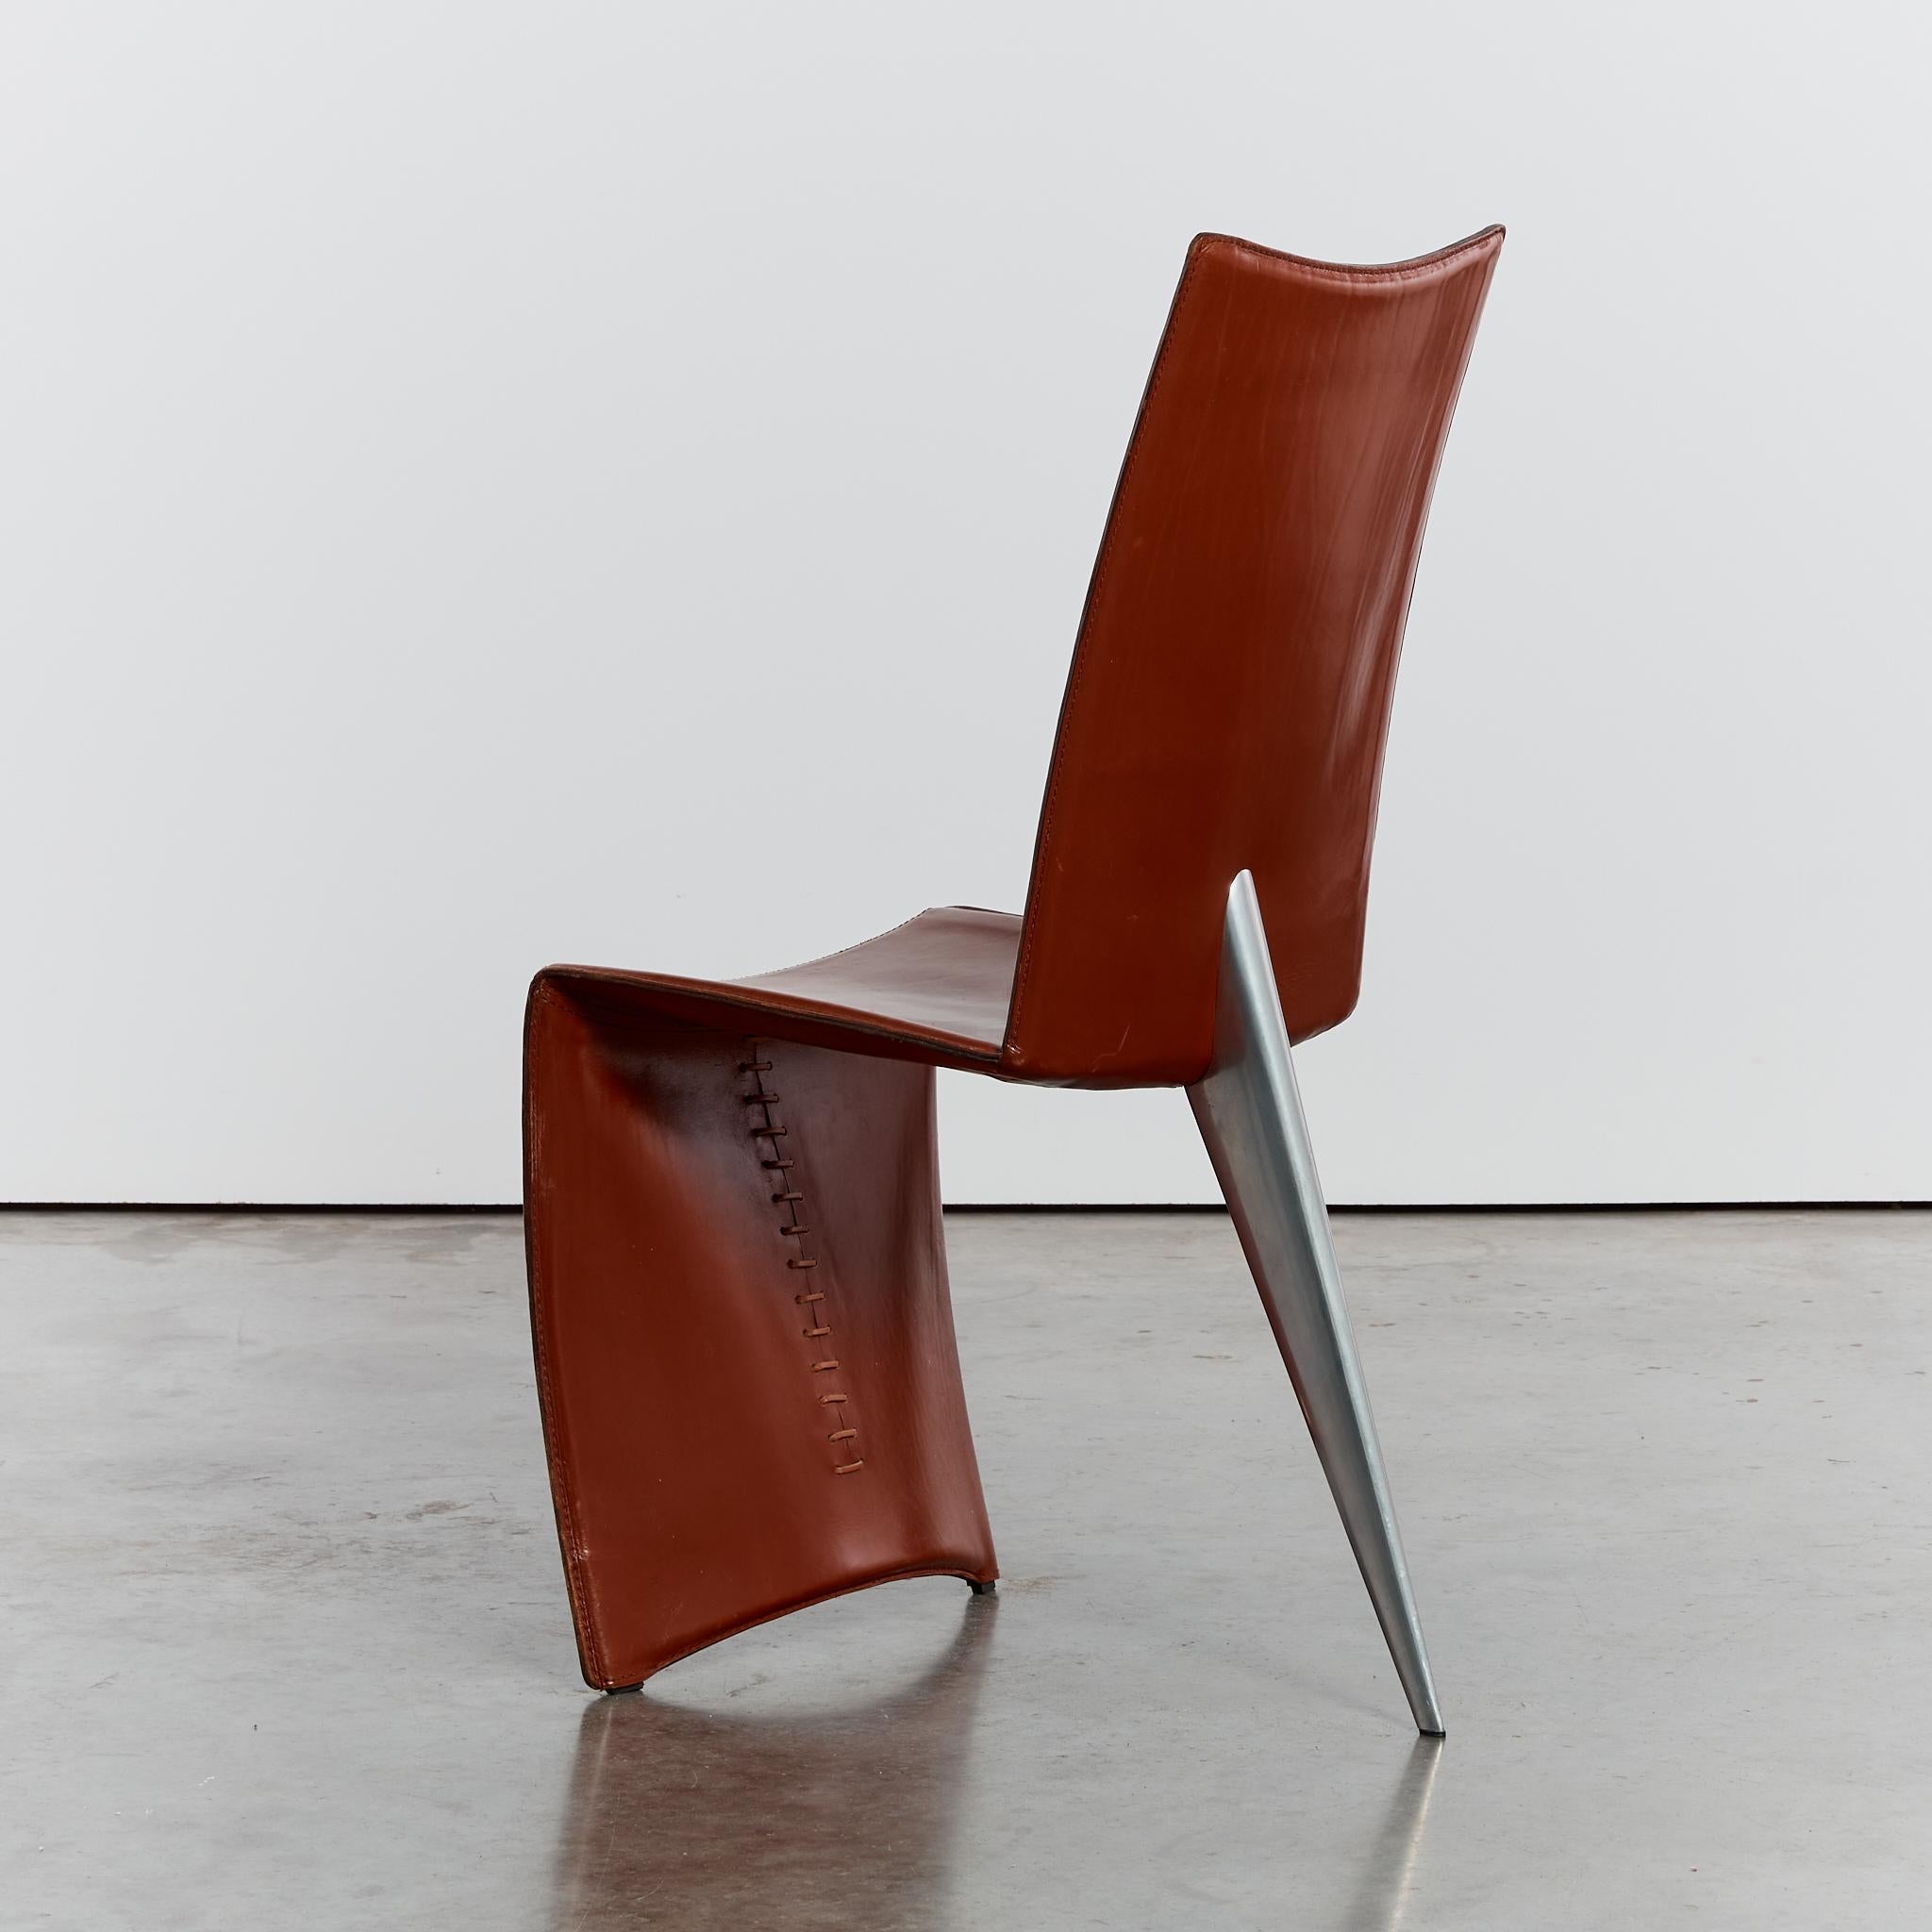 20th Century Ed Archer chair by Philippe Starck for Driade